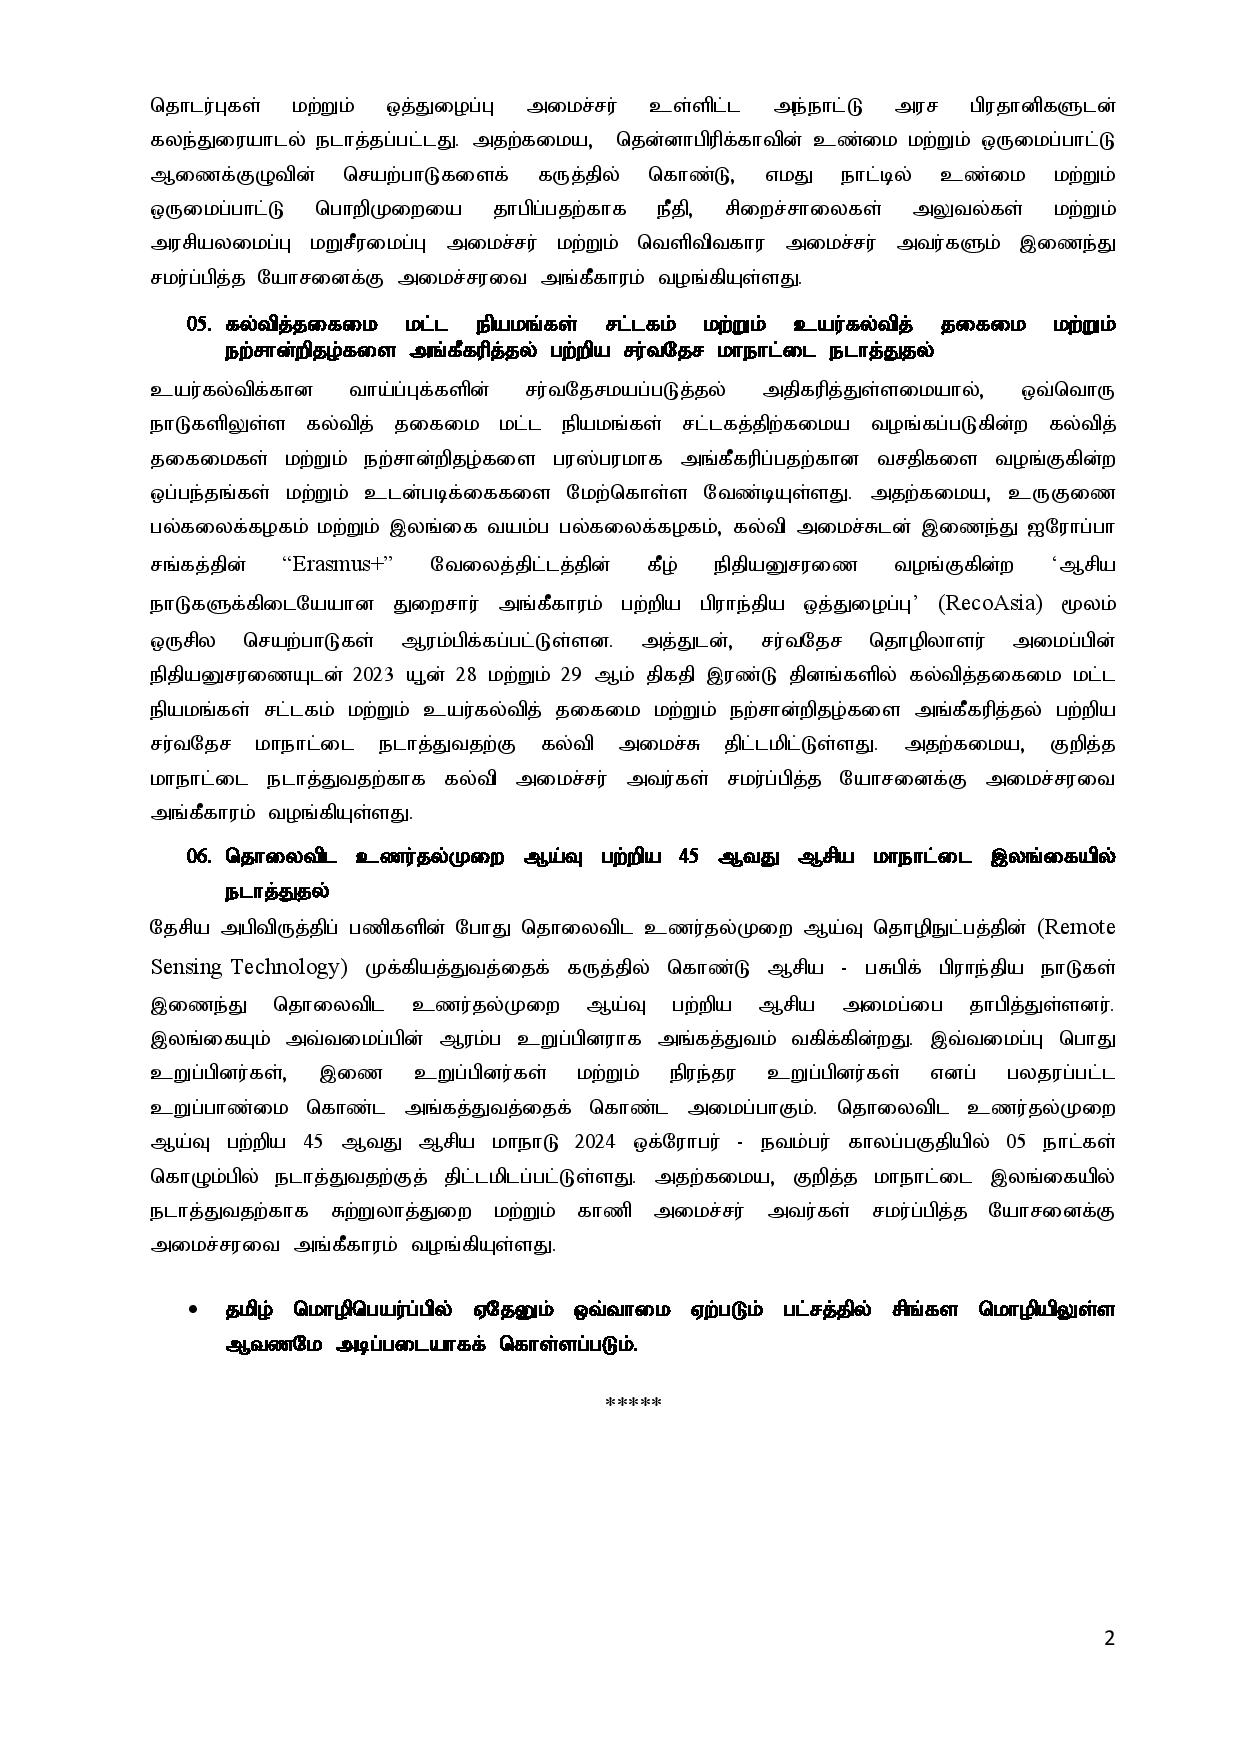 Cabinet Decisions on 29.05.2023 Tamil page 002